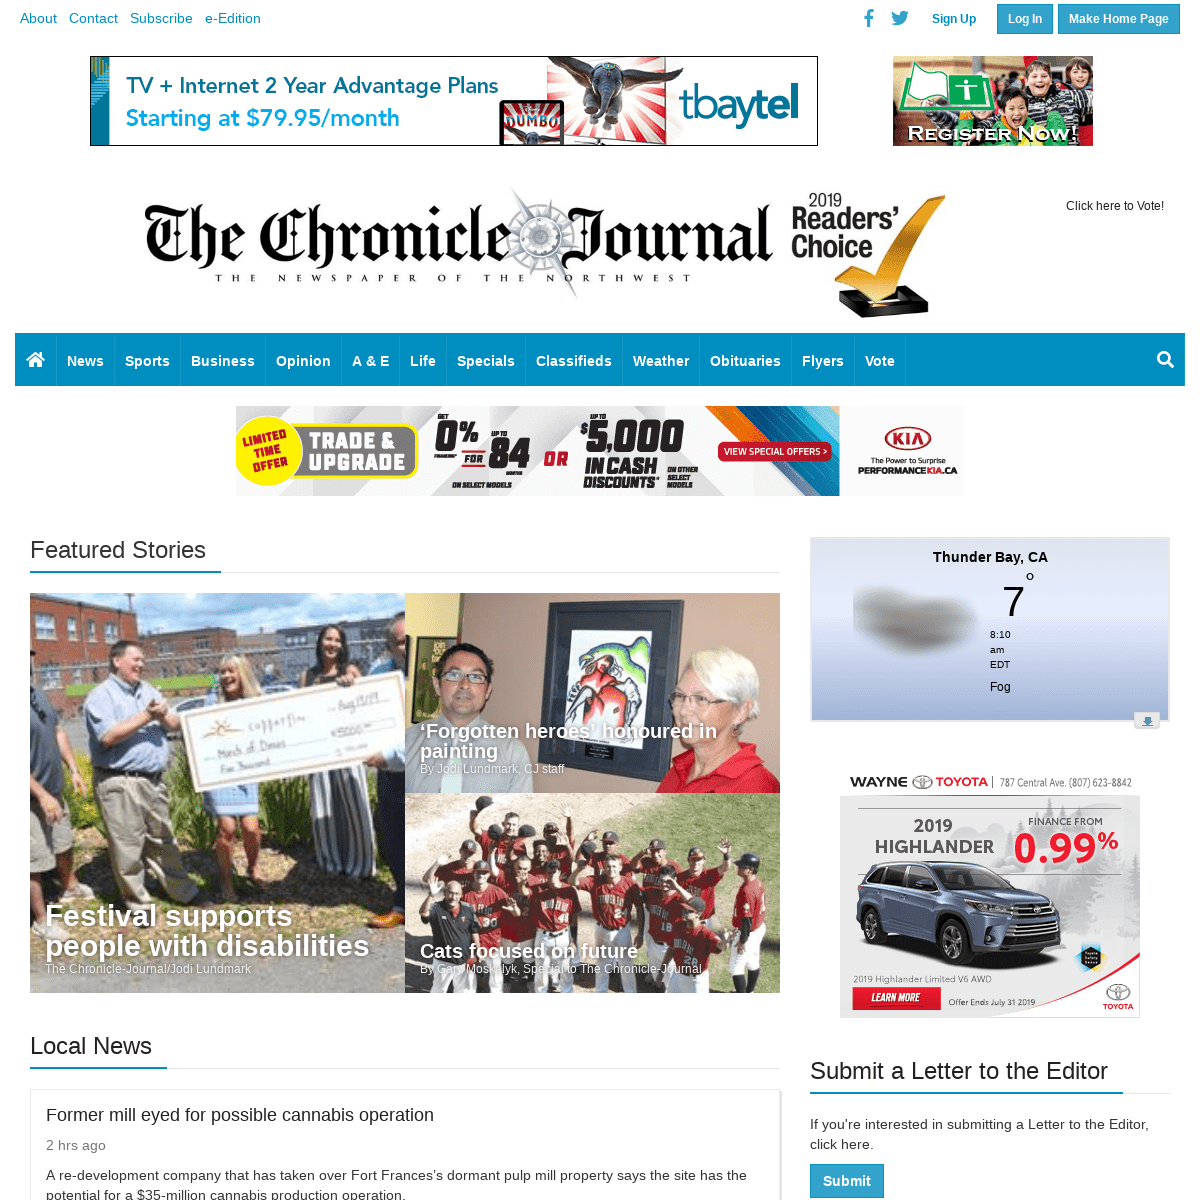 chroniclejournal.com | The Newspaper of the Northwest